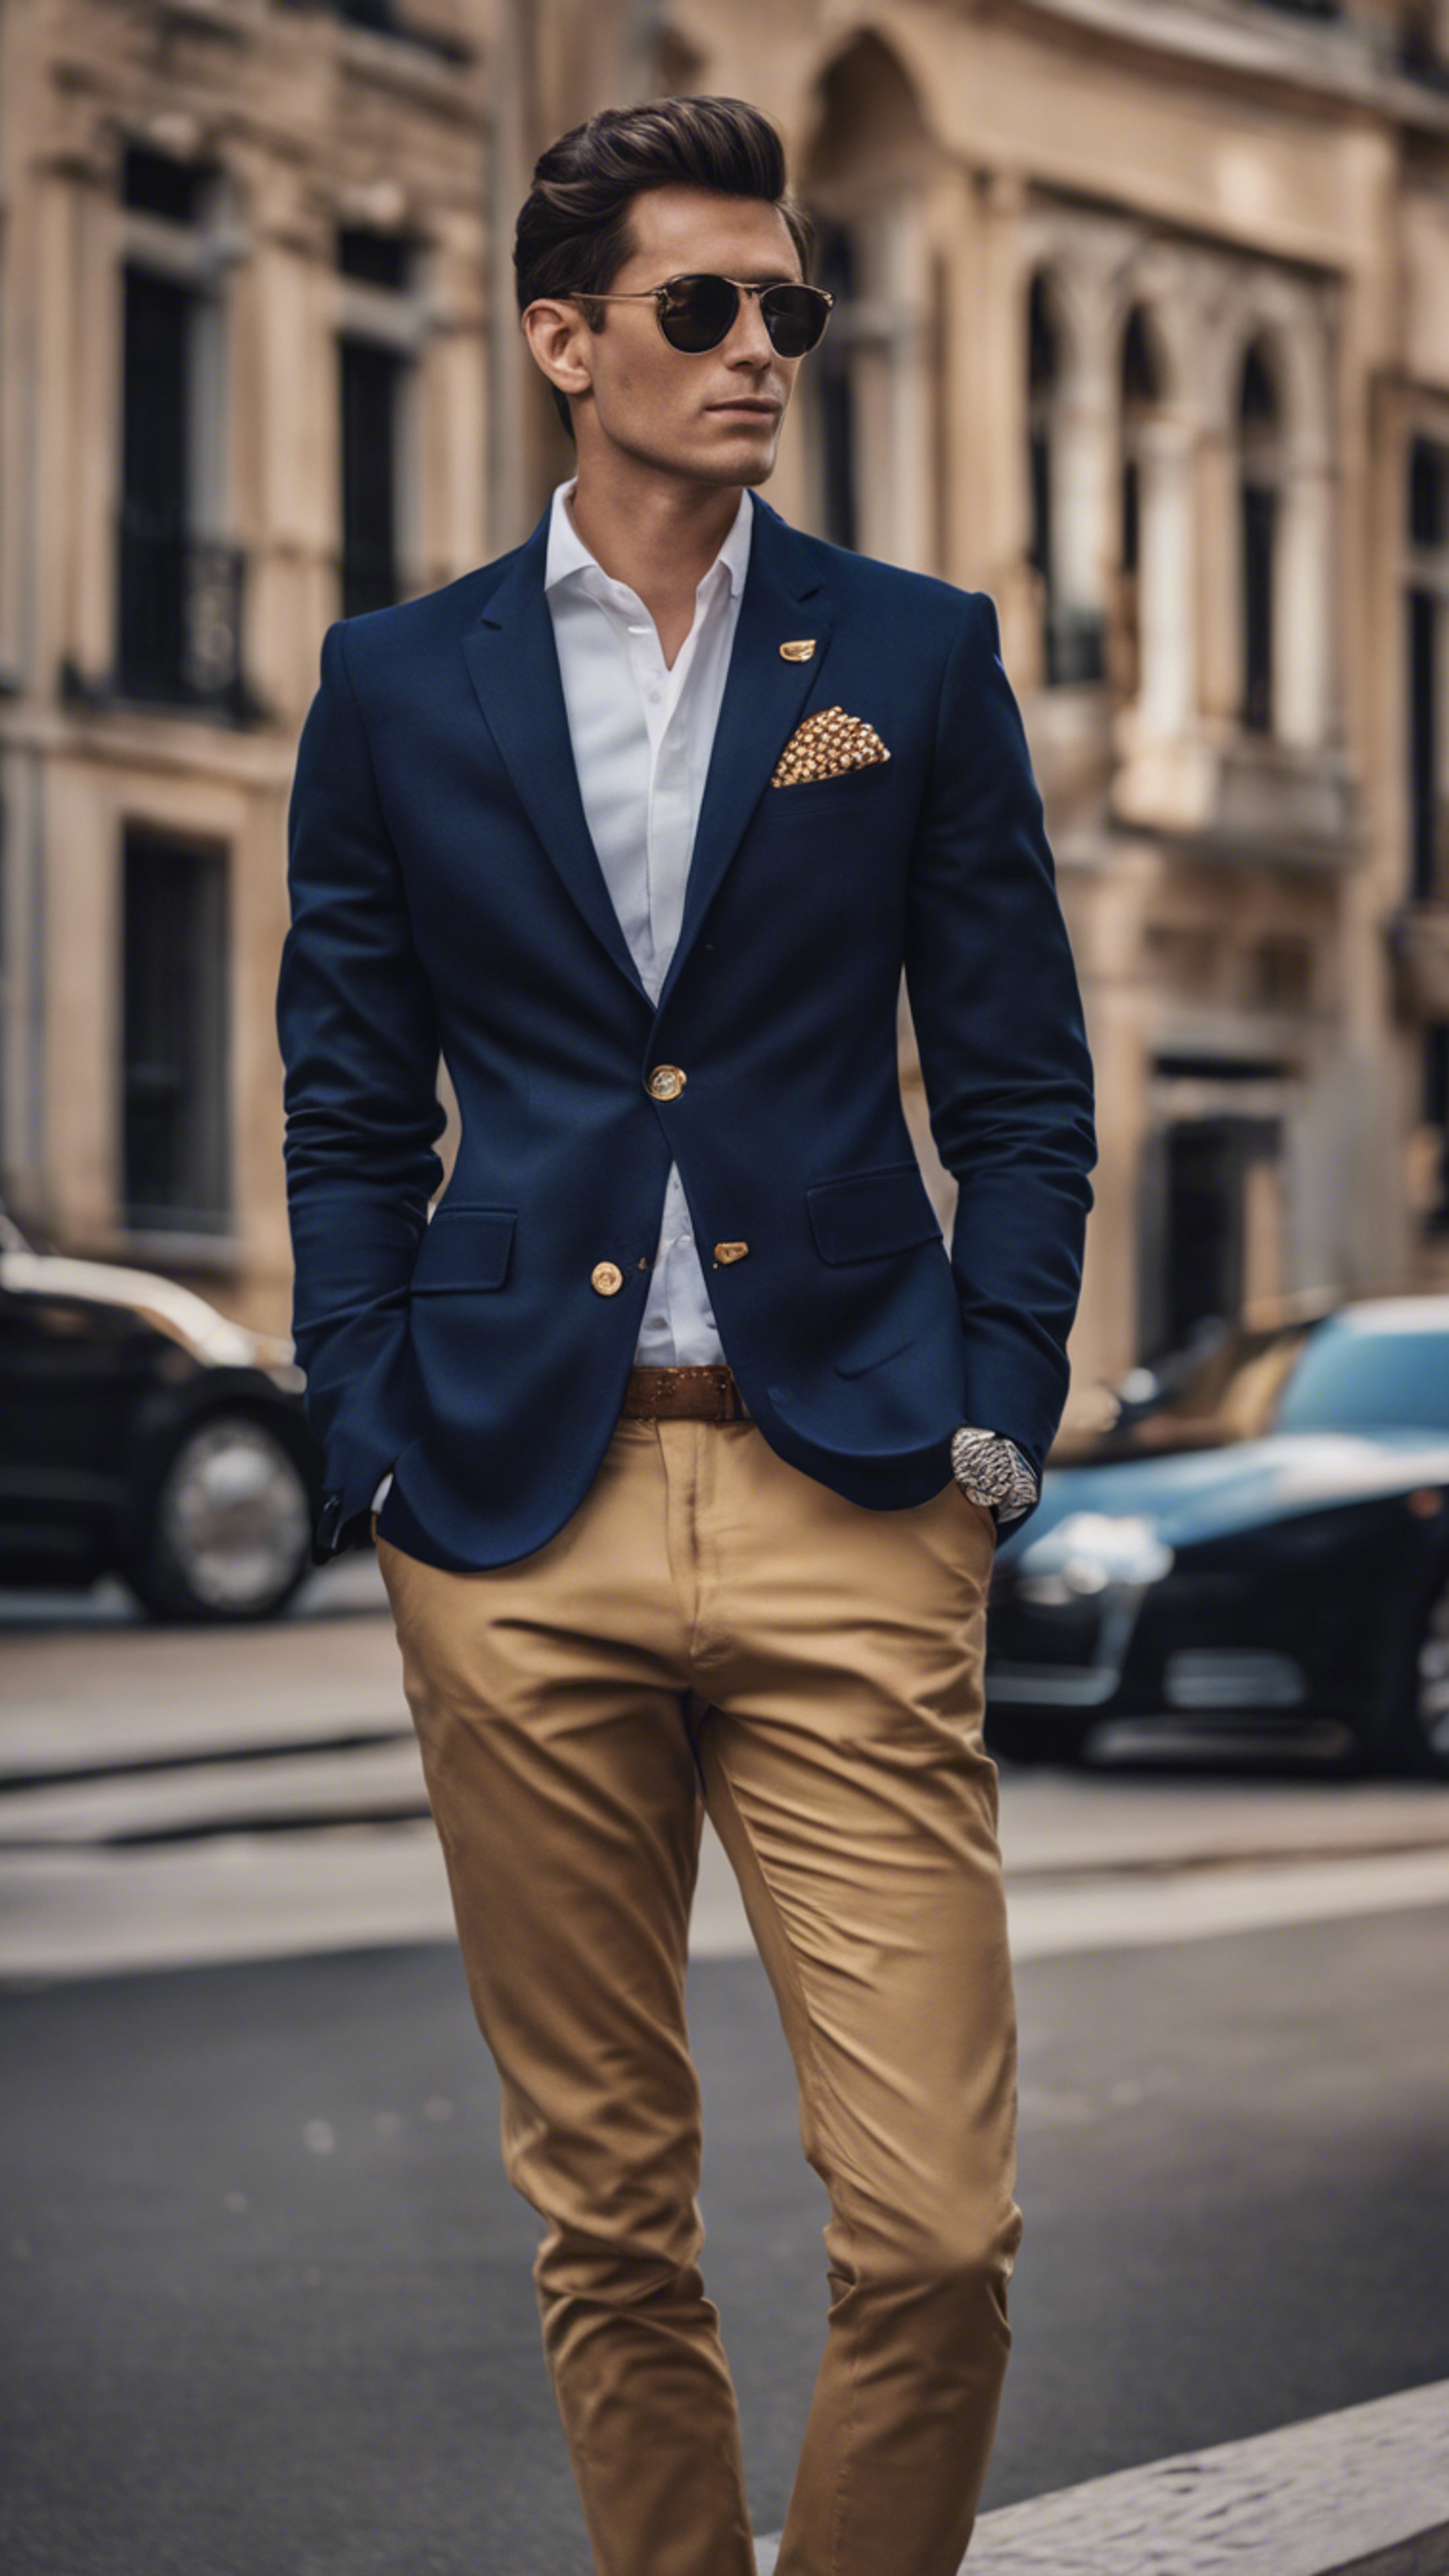 A preppy style male wearing a navy blazer with golden buttons.壁紙[81a126e7891348aa9b4e]